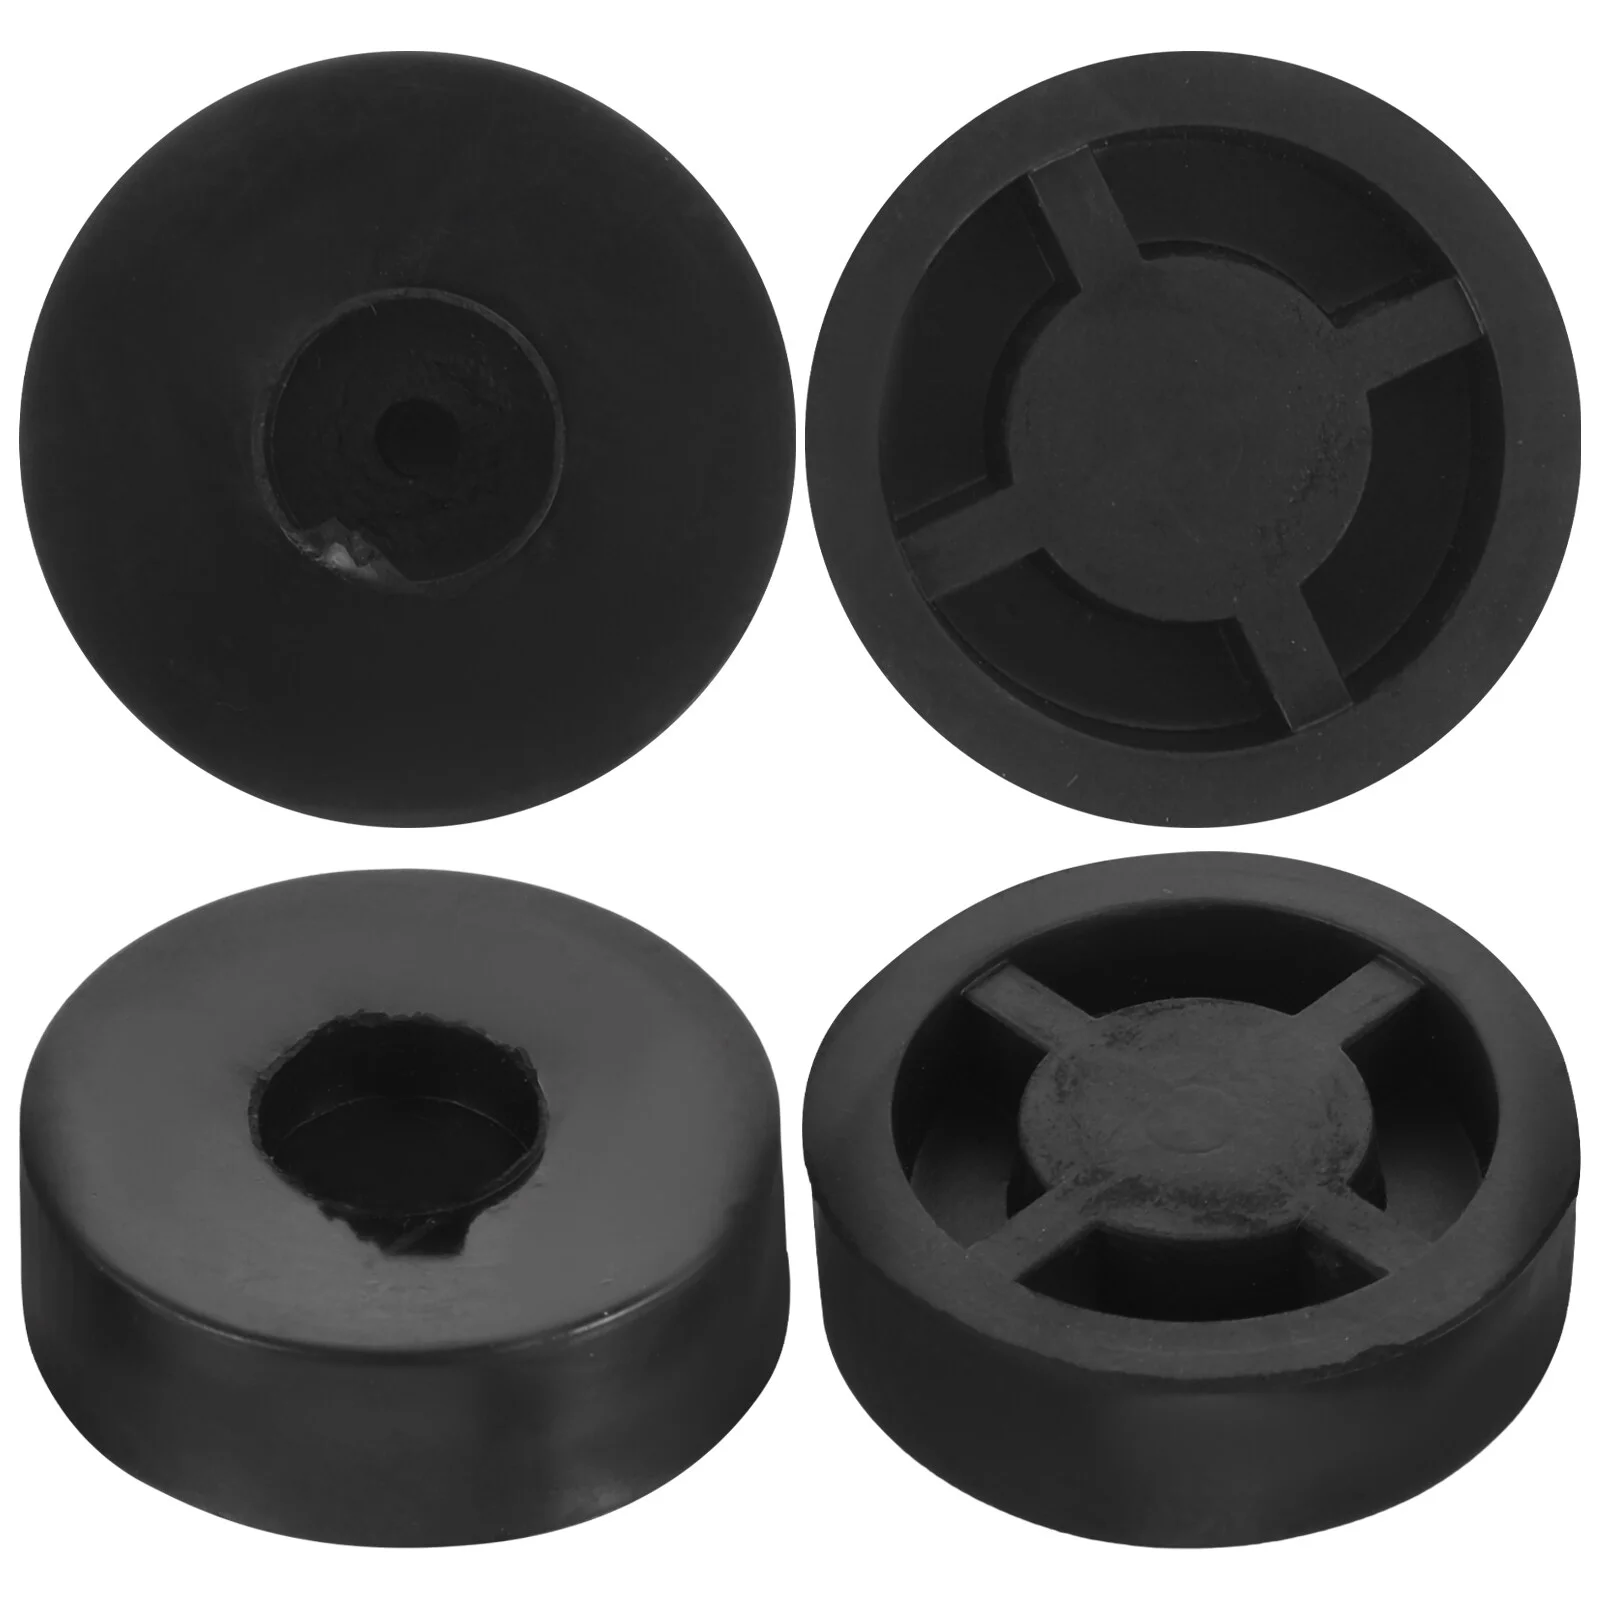 

4 Pcs Shock Absorbers Boombox Speaker Feet Trumpet Rubber Isolation Pad Turntable Stand Spikes Pads Supply Subwoofer